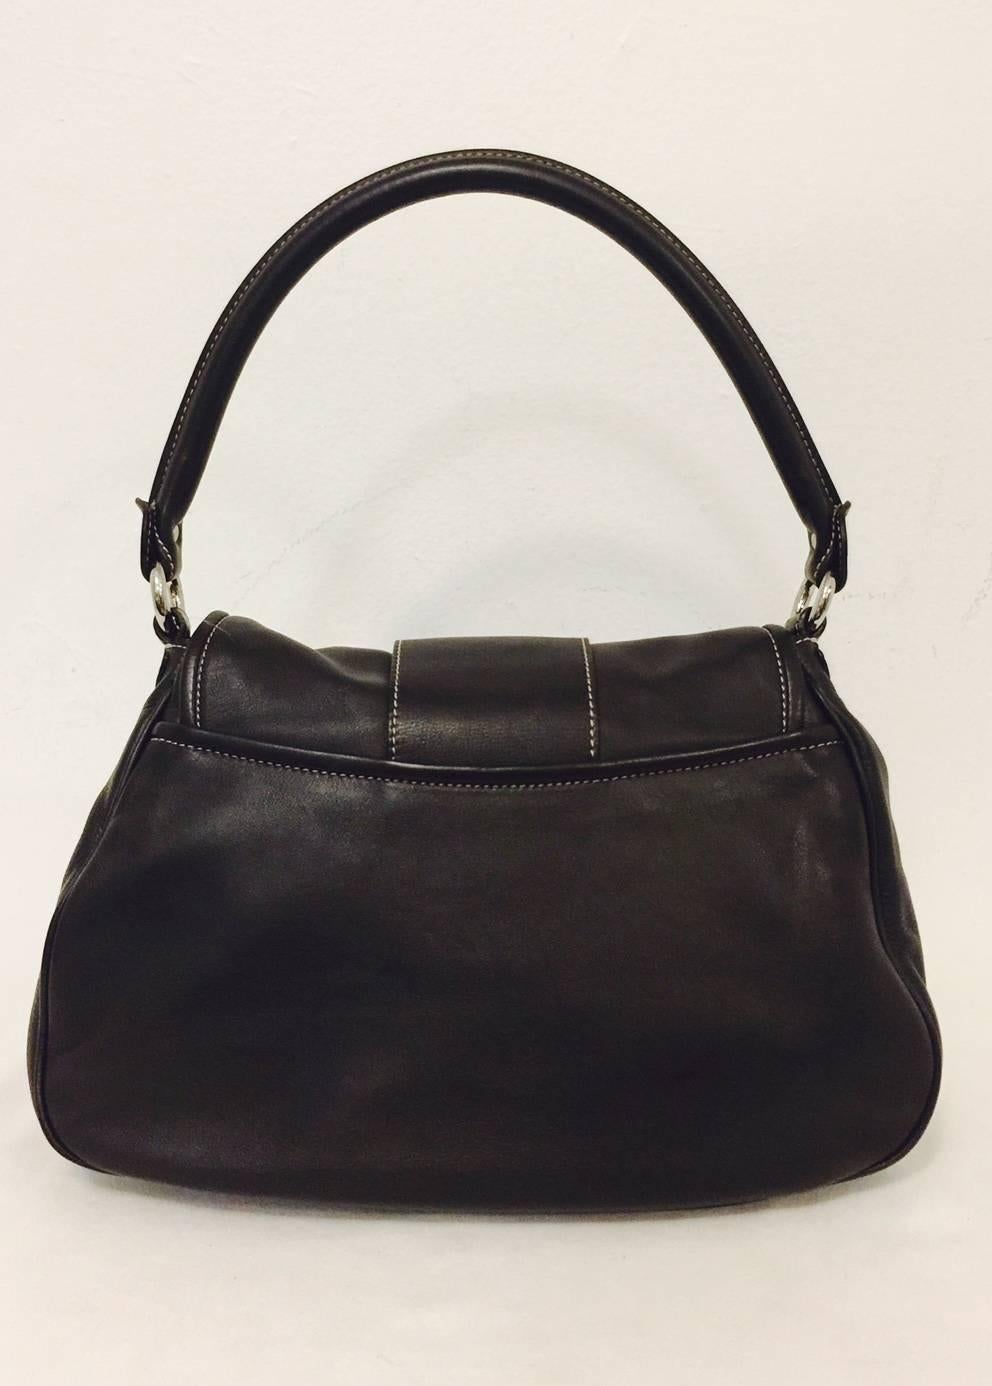 Black Christian Dior Chocolate Leather Flap Shoulder Bag With Silver Tone Hardware  For Sale